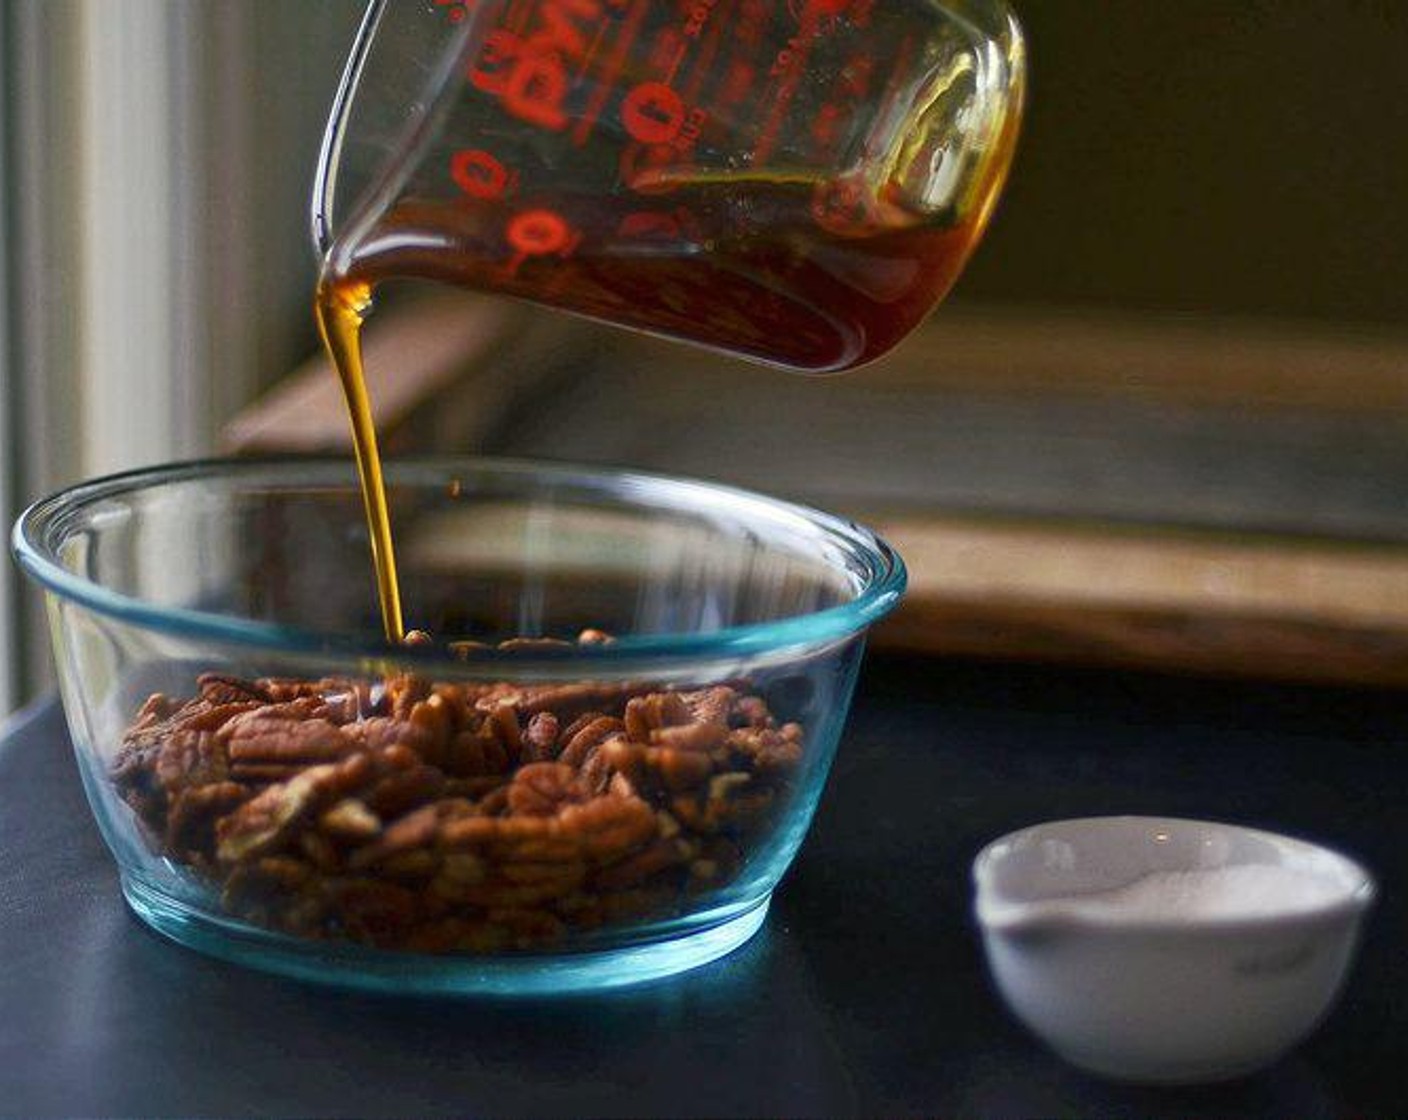 step 3 Place Pecan Halves (3 cups) in a medium mixing bowl and pour warmed honey over pecans. Toss to coat pecans well.